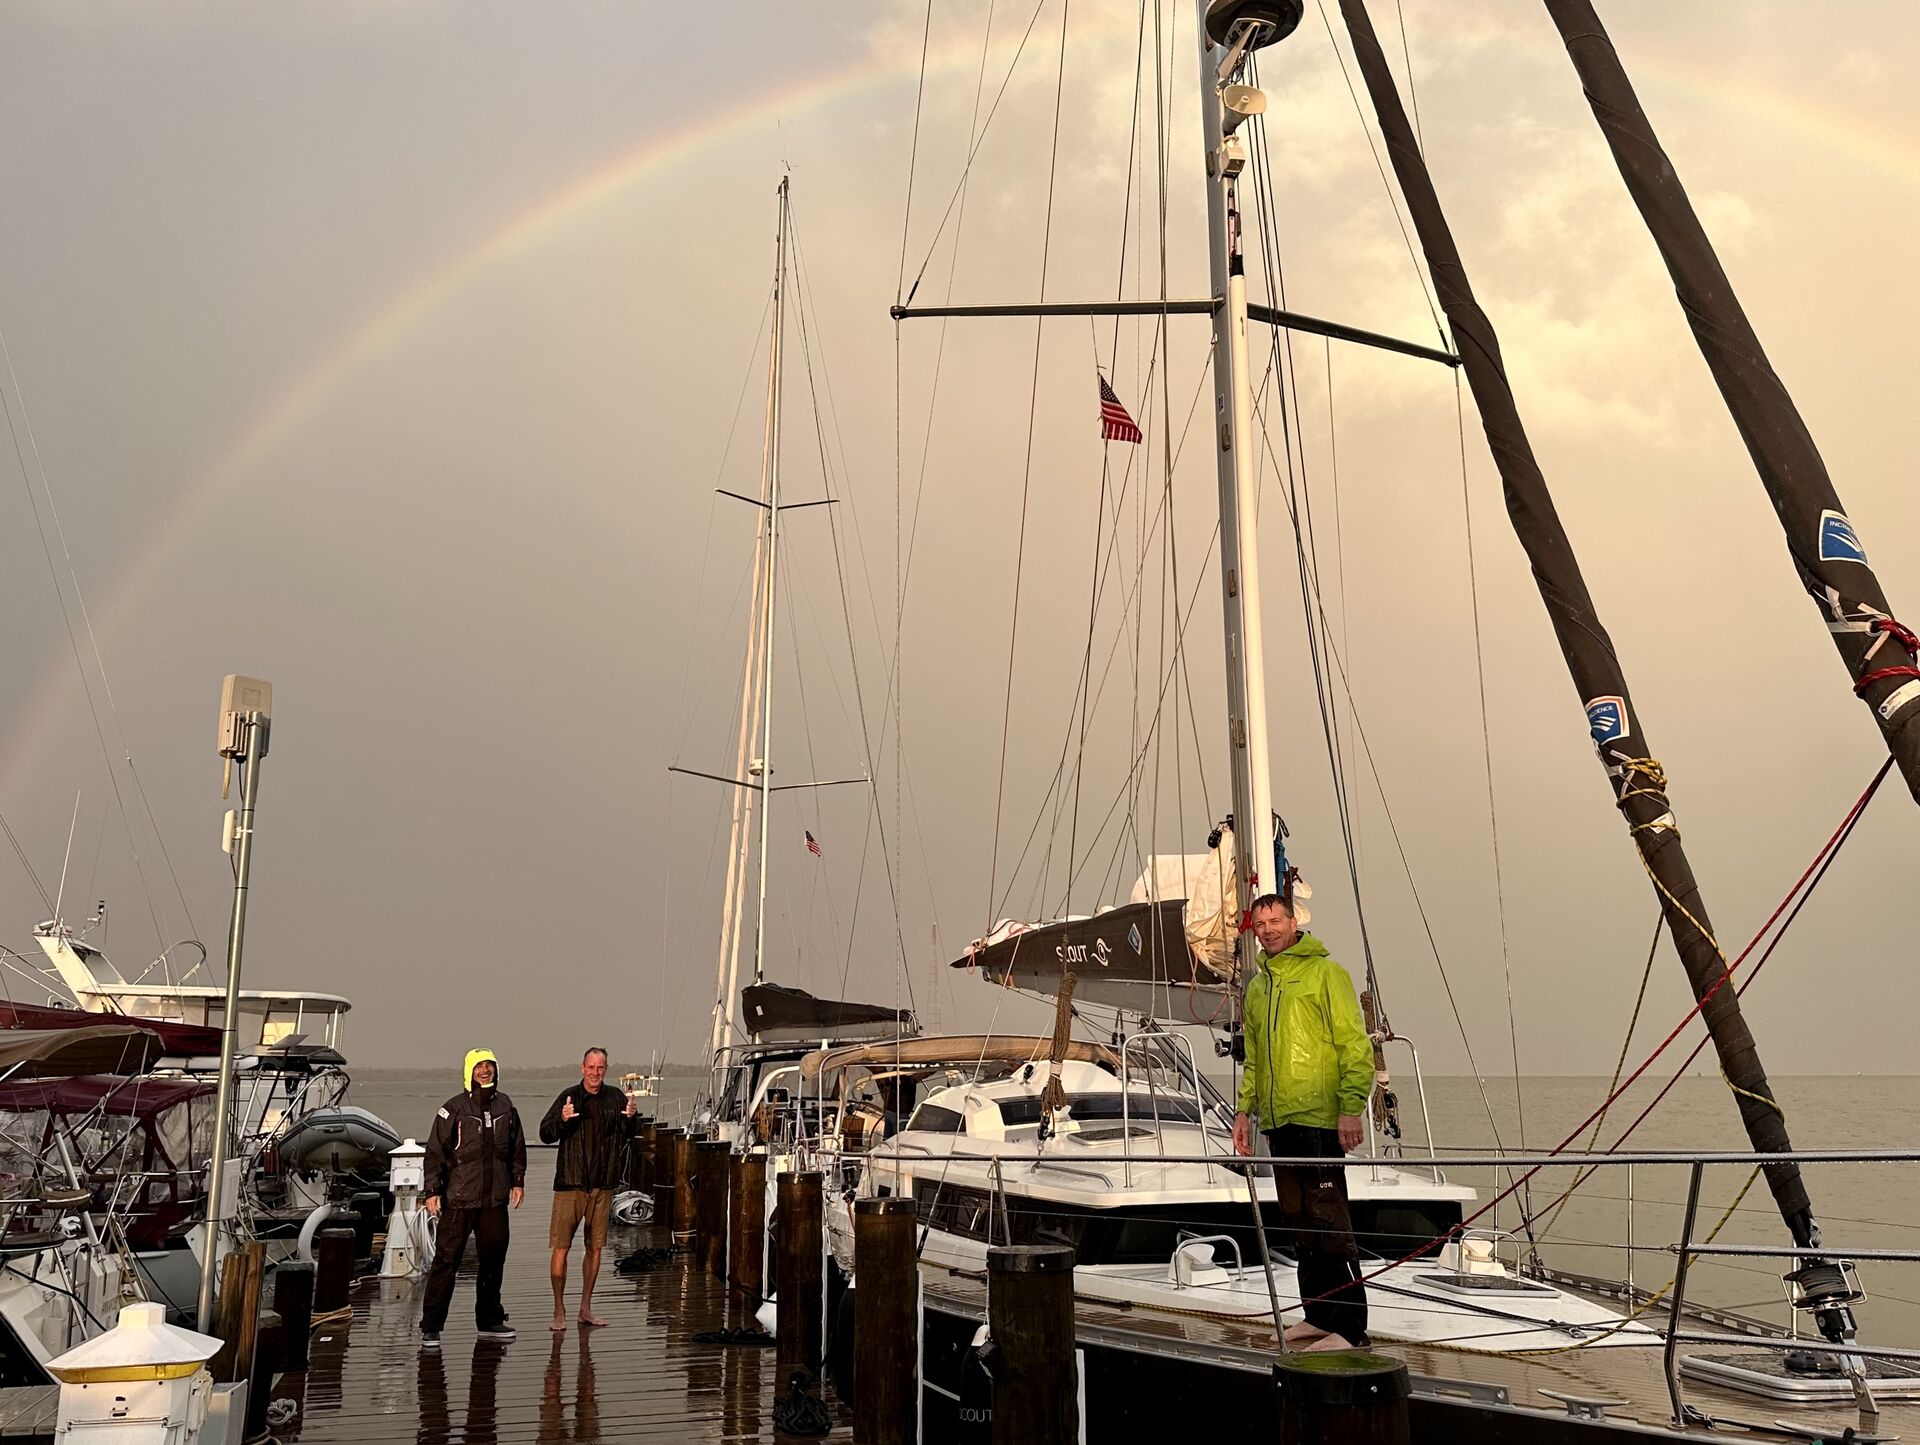 Caught in a rainstorm after the boat show.